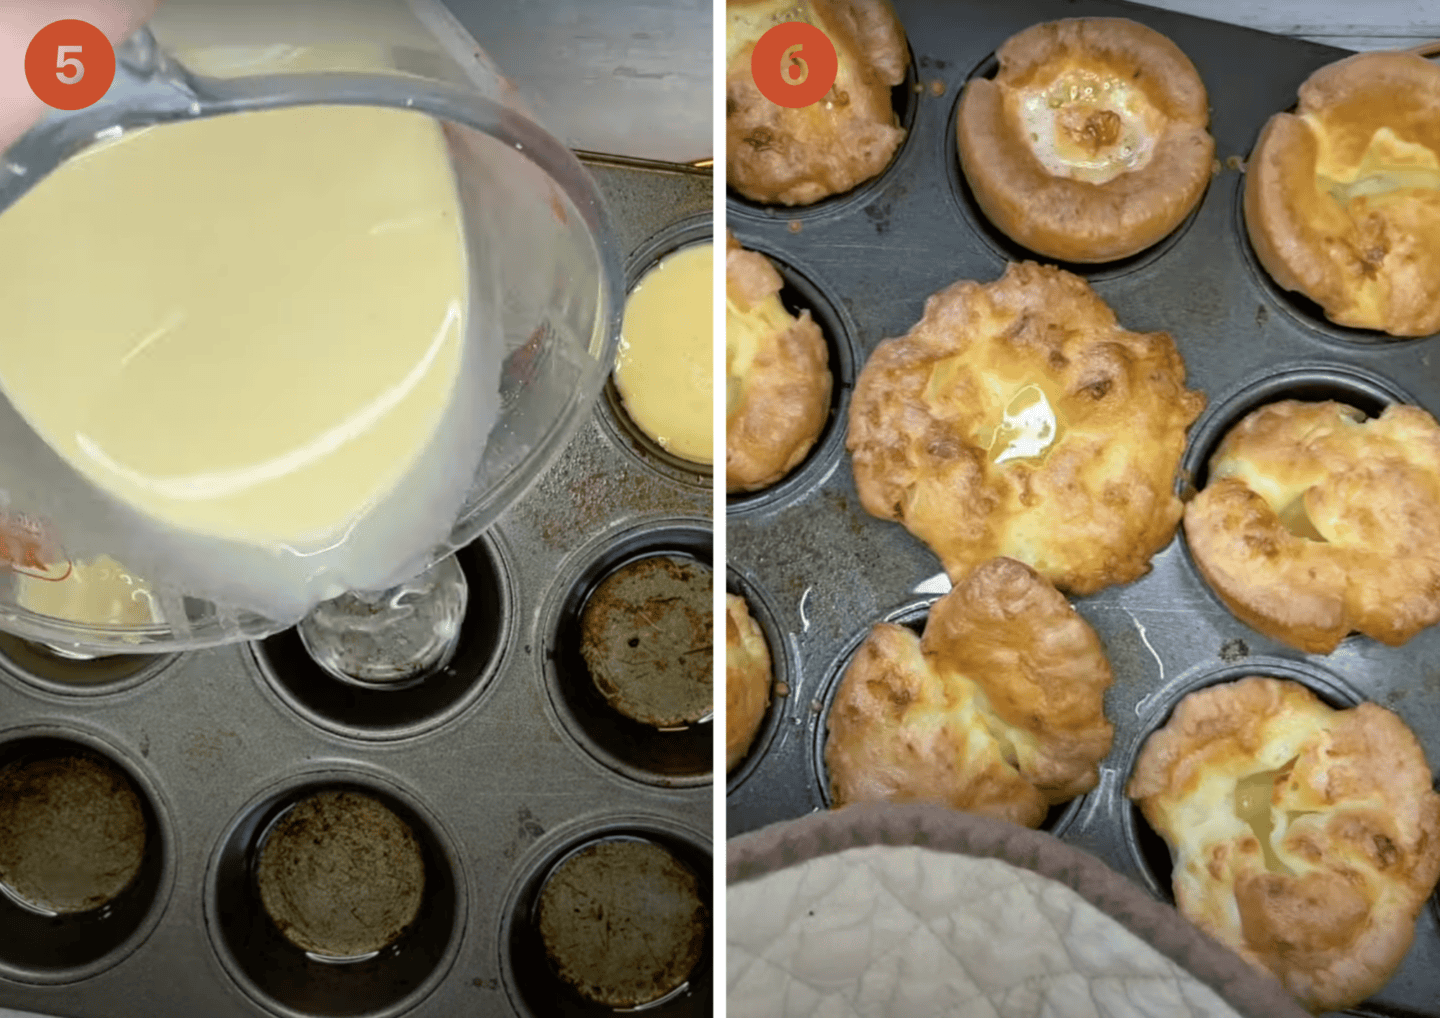 Pour the Yorkshire pudding batter into the tin and then bake.